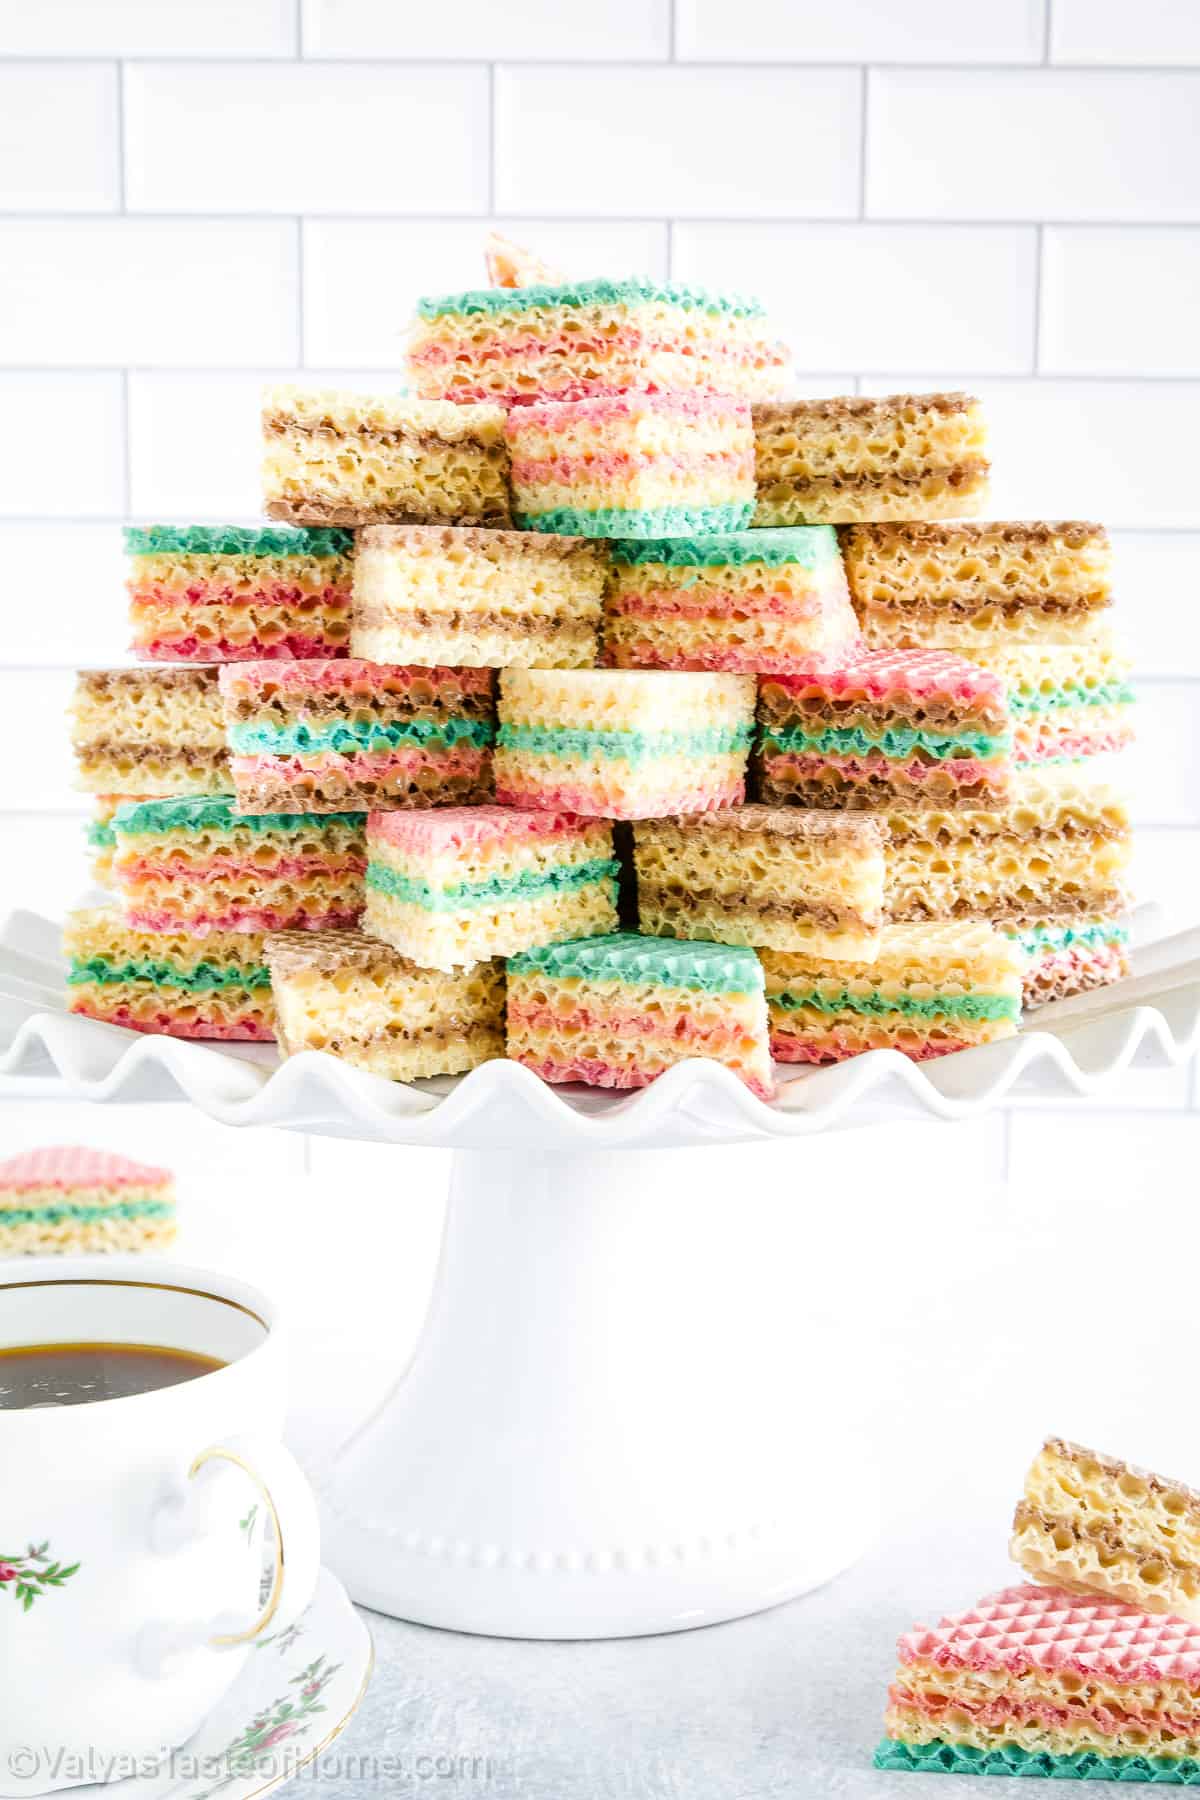 A waffle cake is a type of dessert made by layering colorful wafer cookies with sweetened condensed milk and letting it sit under a press or weight to soften and compress the layers.